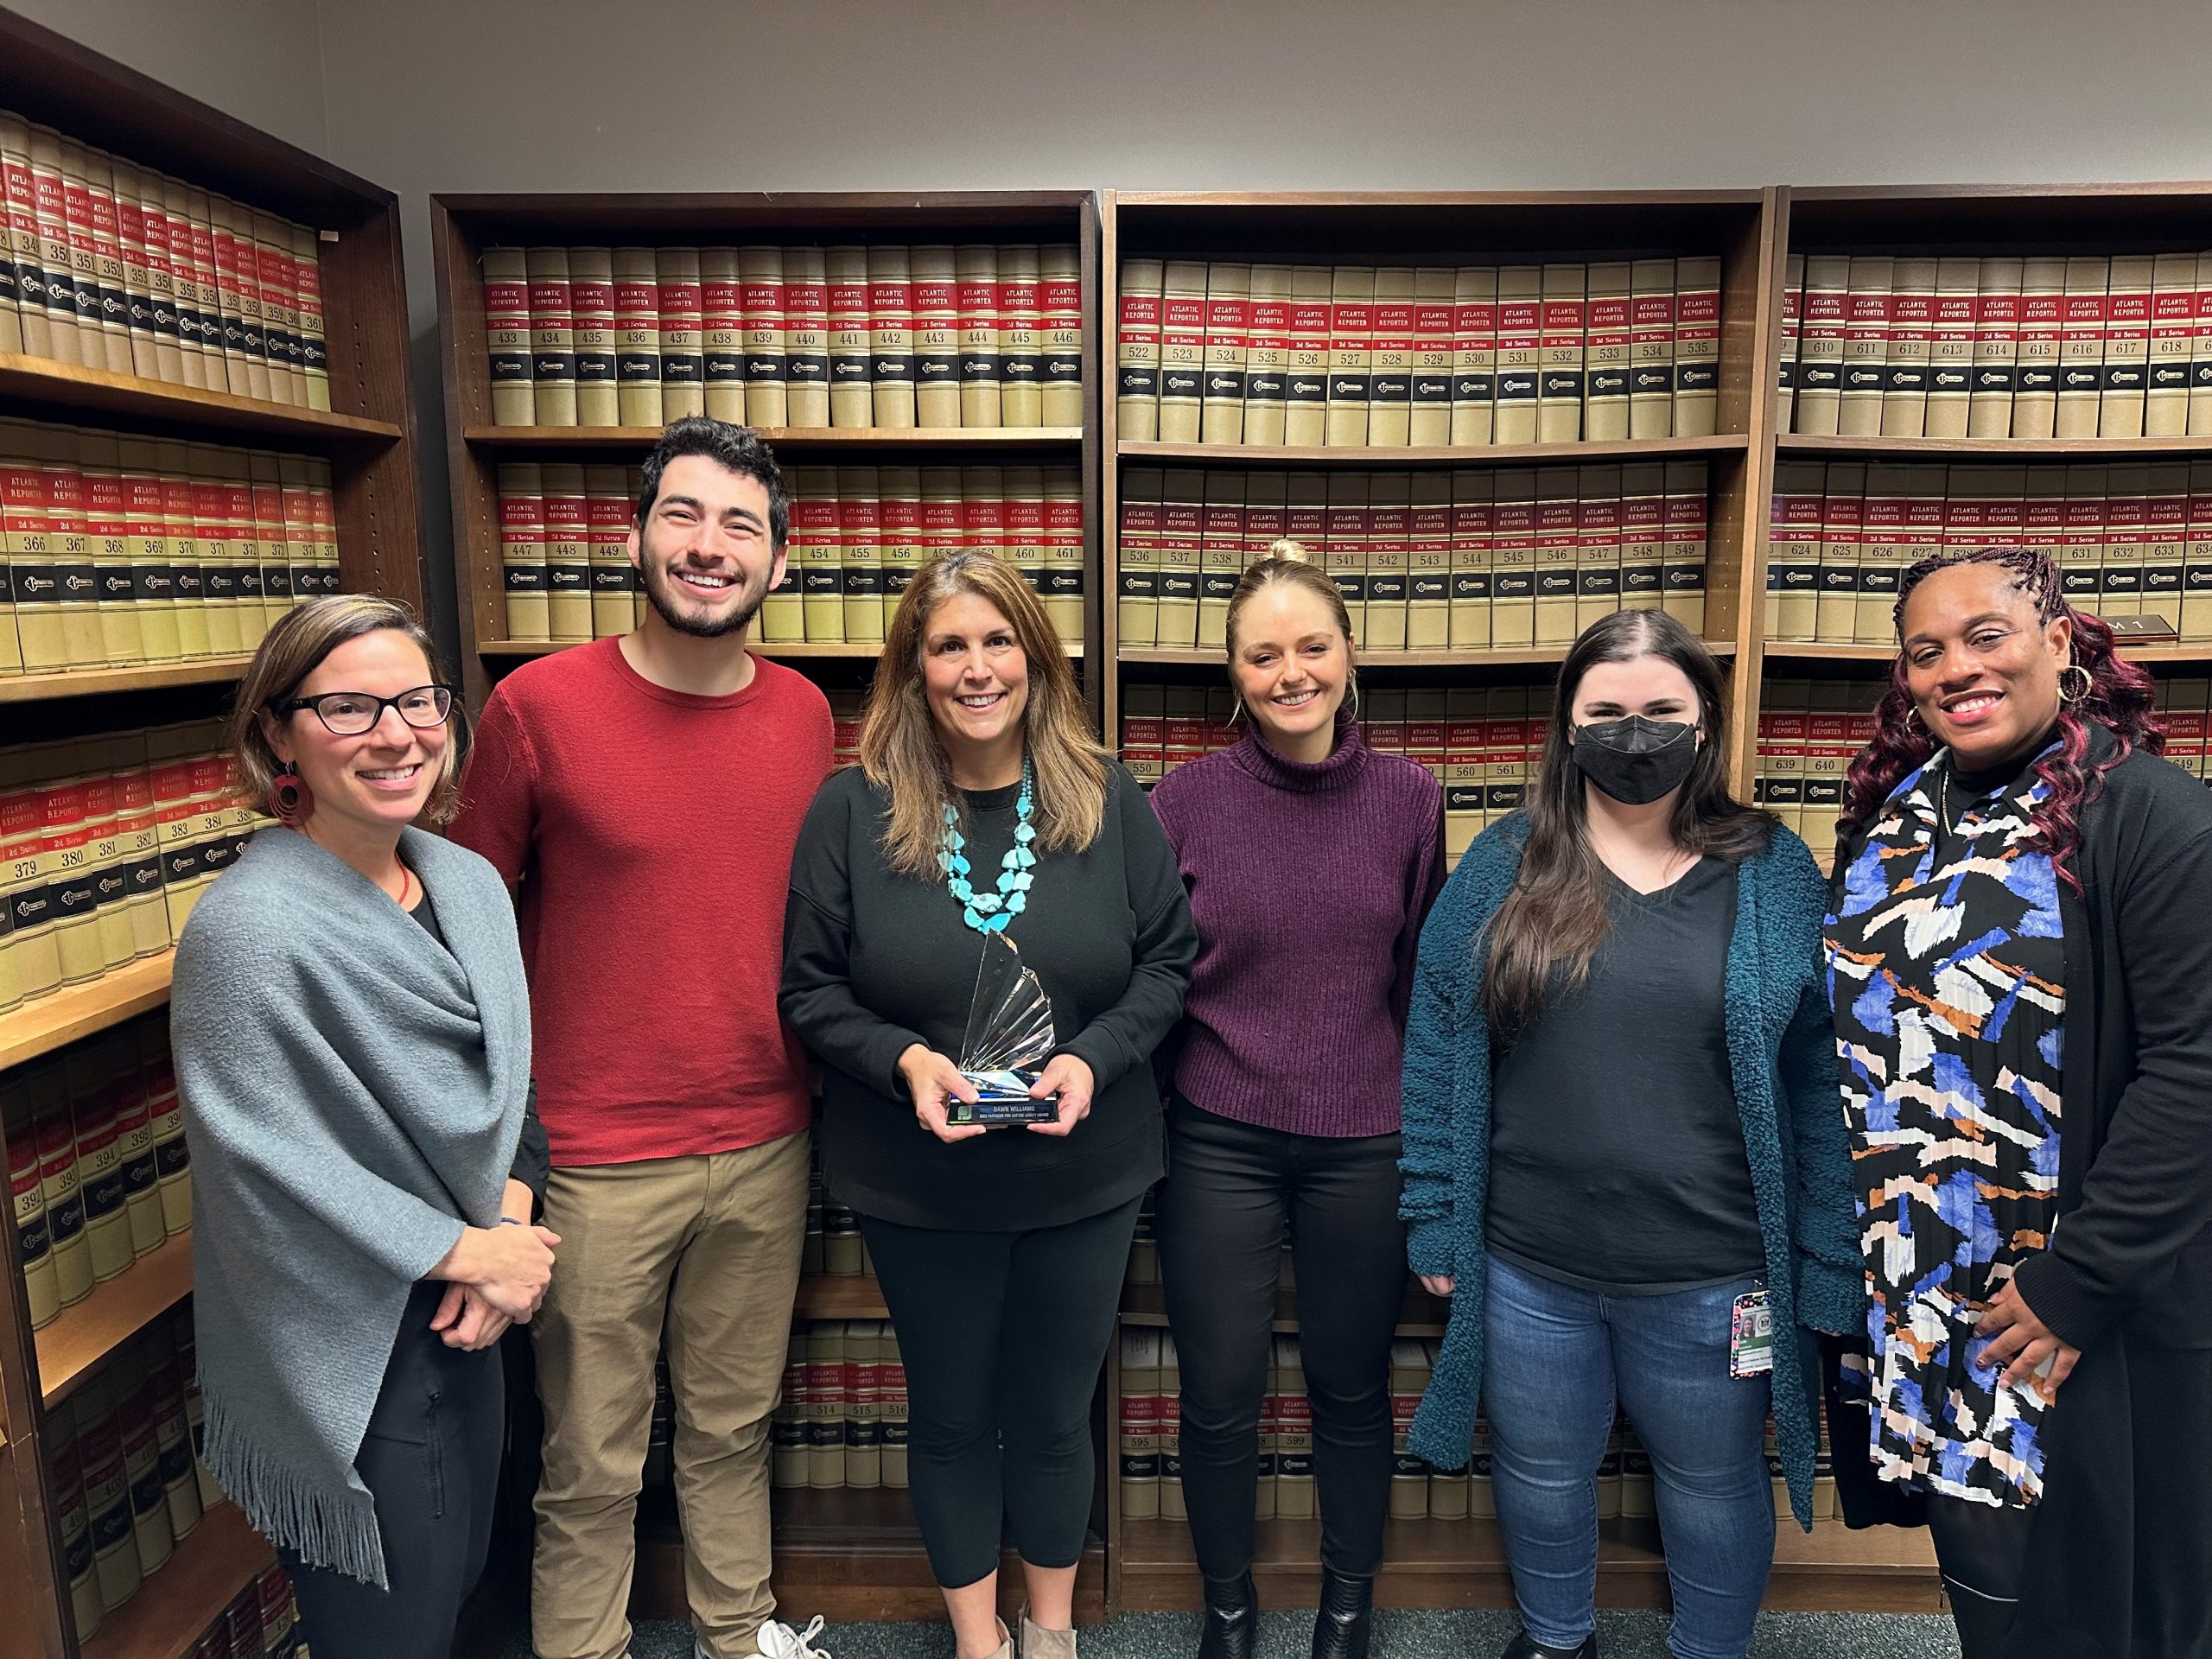 Dawn Williams, center, is awarded the Partners for Justice Legacy Award. From left to right is Eliza Hirst, ODS's post-disposition attorney, Ian Homsy, PFJ advocate, Dawn Williams, ODS Director of Training and Development, PFJ advocates Olivia Louthen and Susannah Gale, and PFJ Regional Program Director, Lenora Easter..